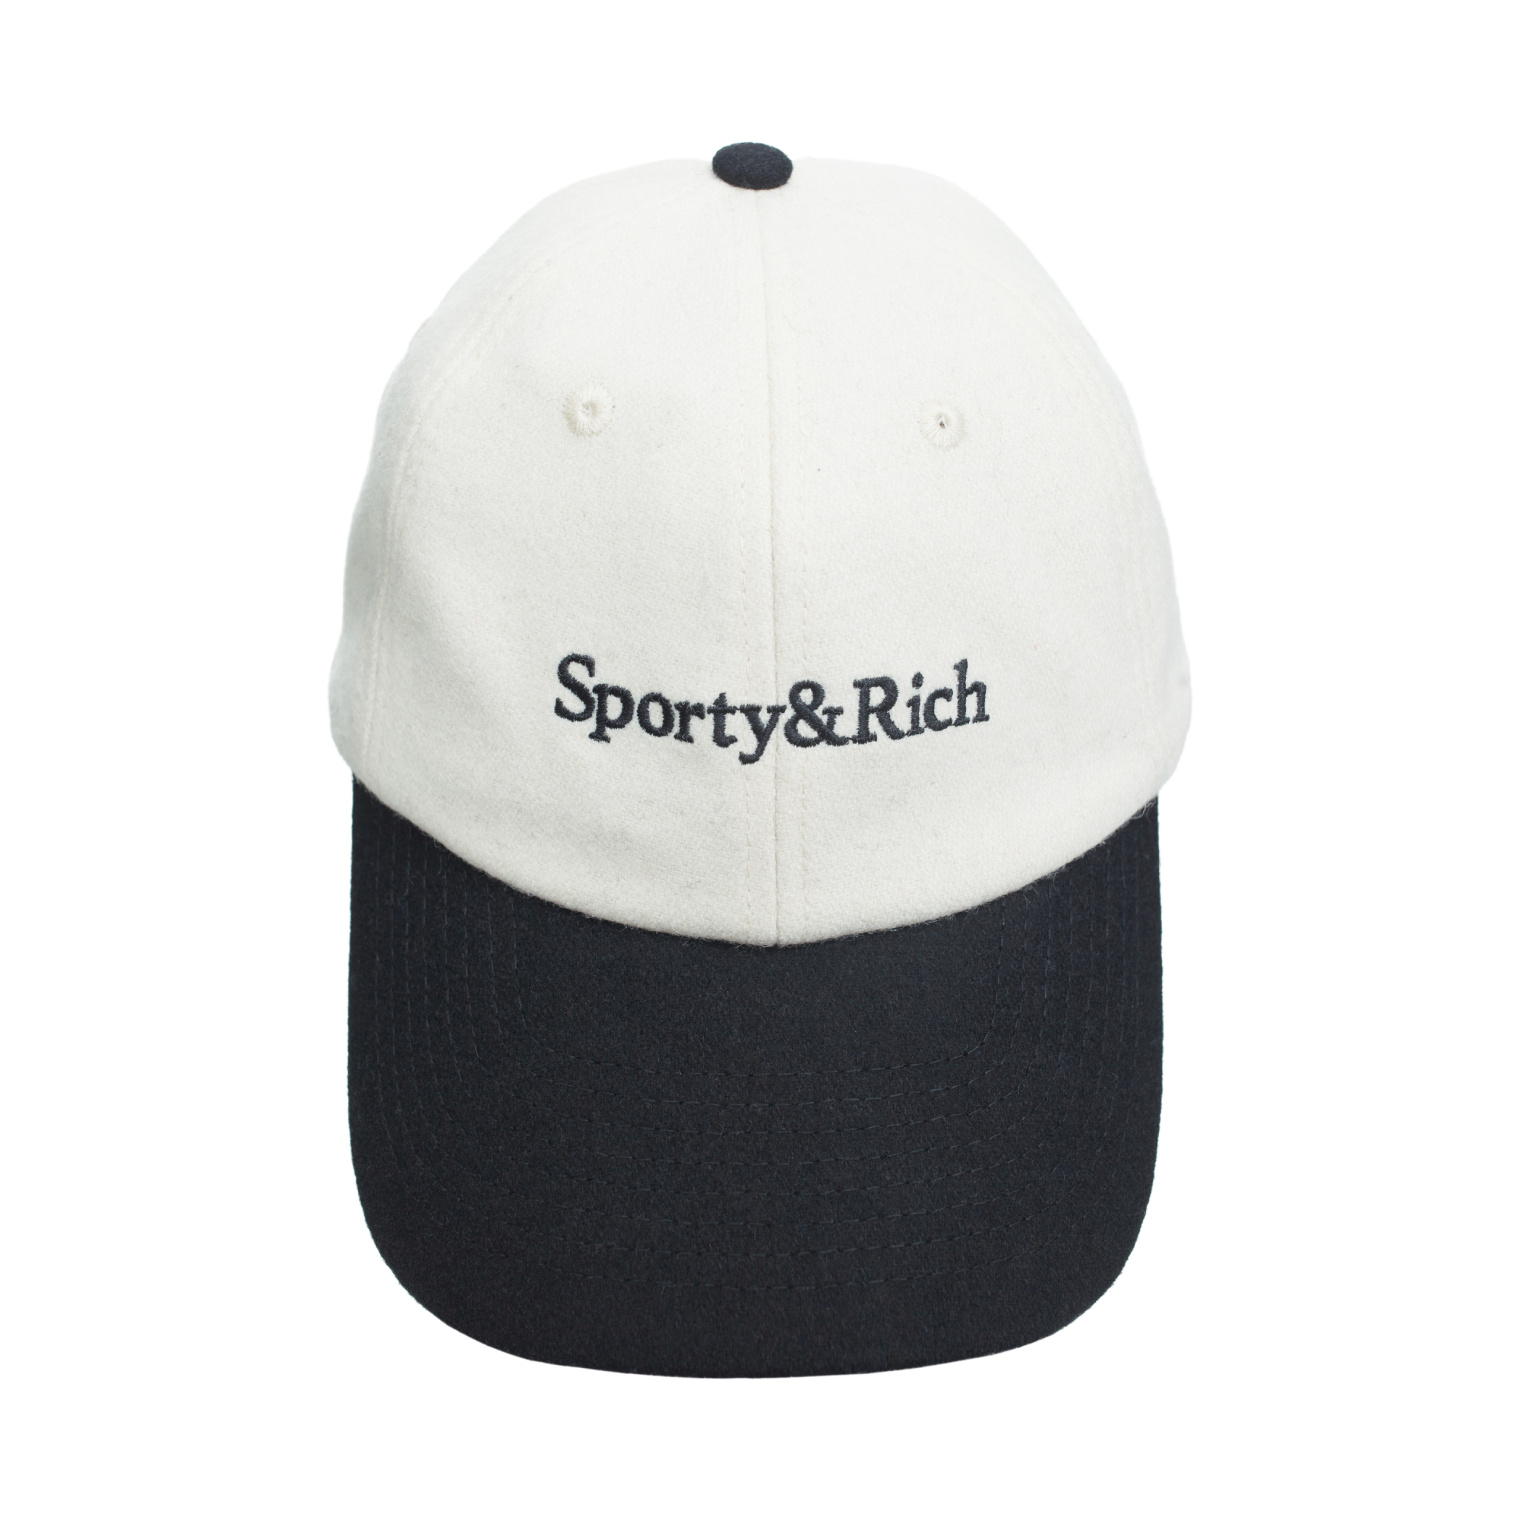 SPORTY & RICH Logo embroidered cap